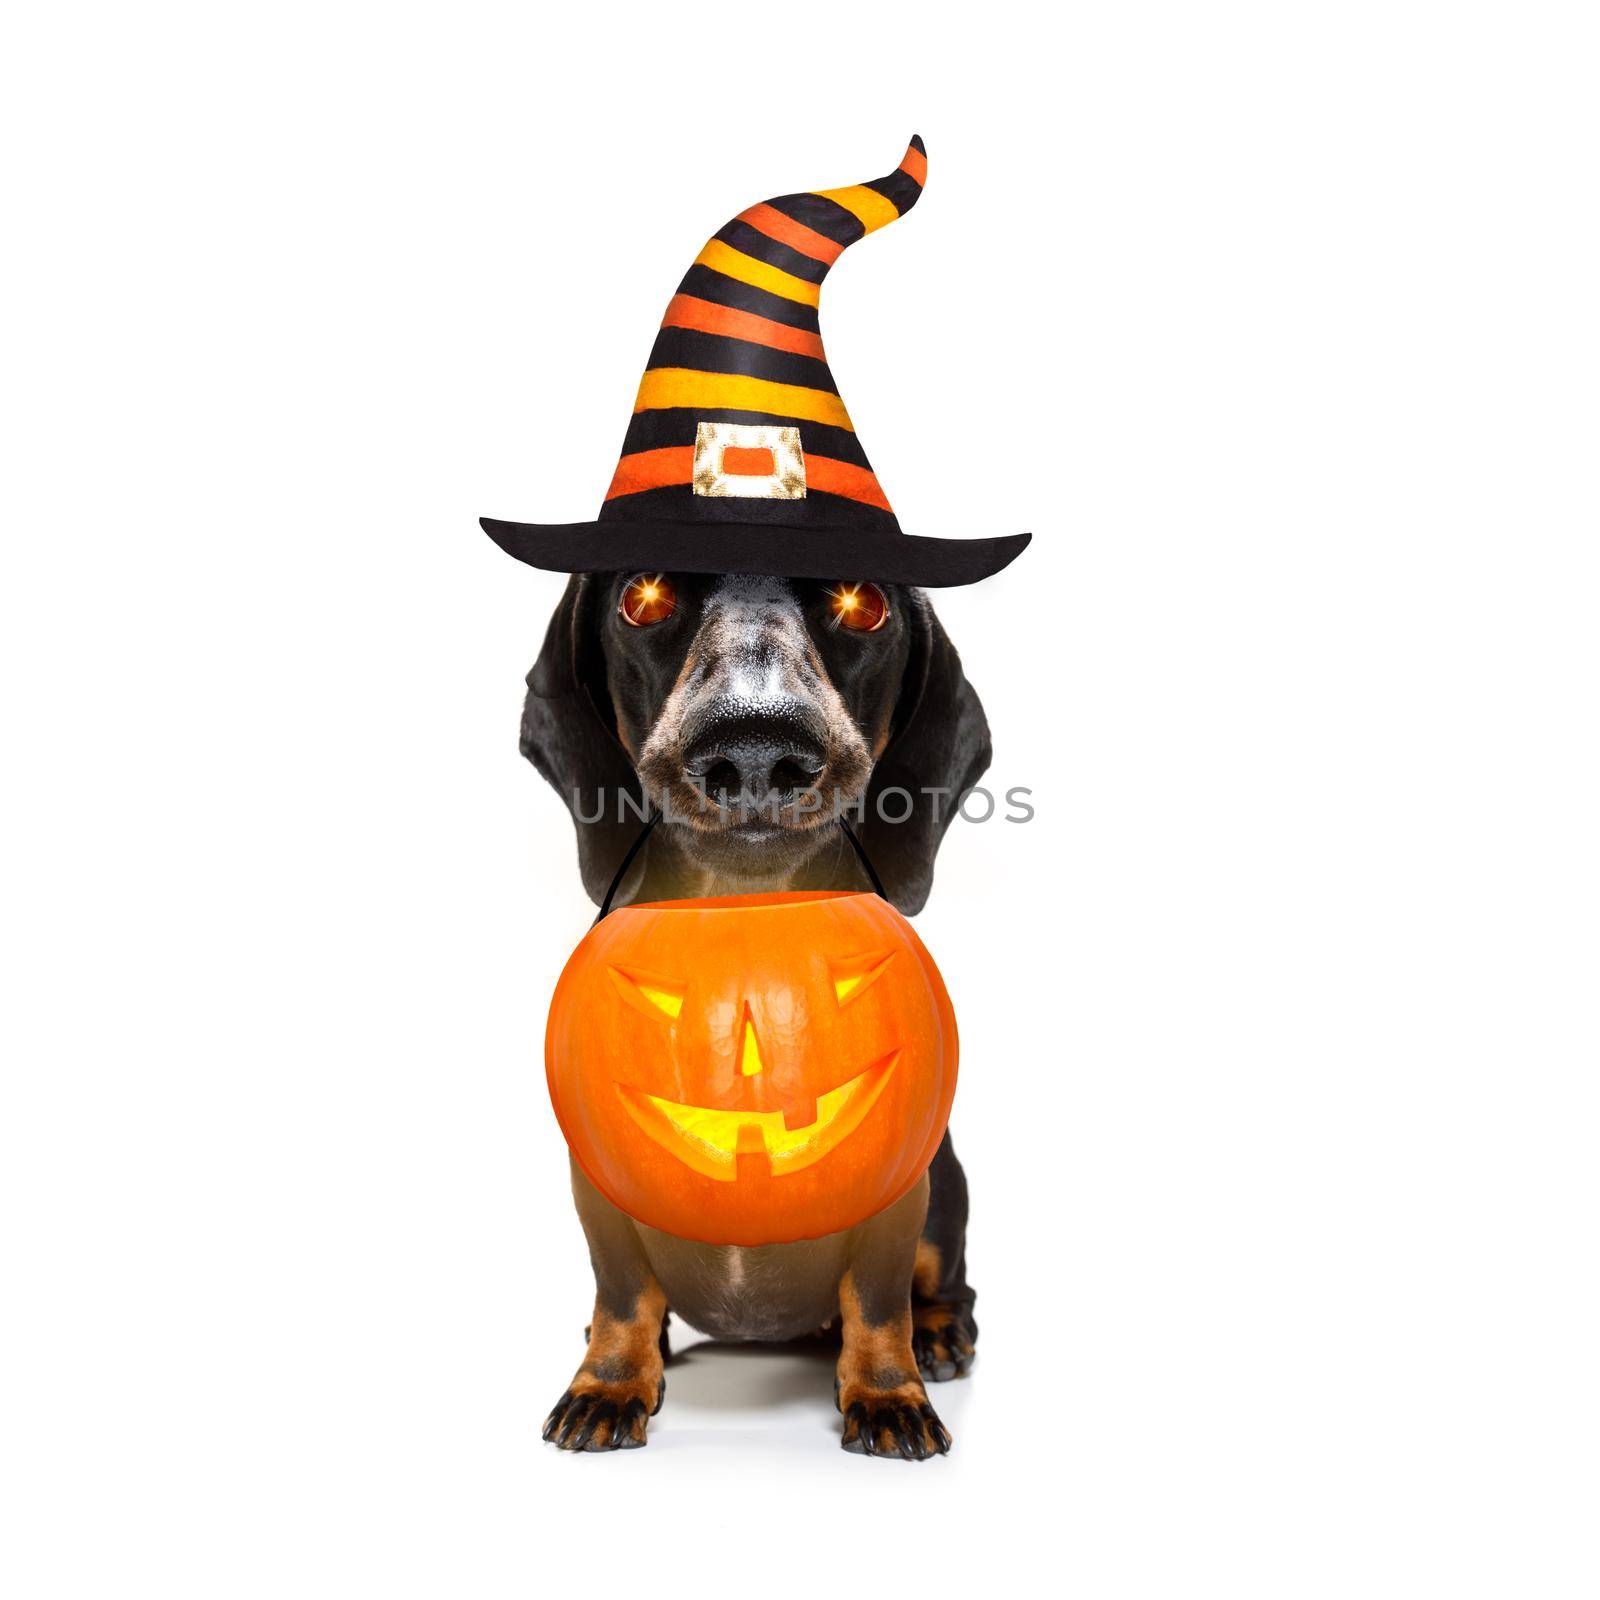 dachshund sausage dog sit as a ghost for halloween sitting   at with pumpkin lantern or  light , scary and spooky glowing eyes 
 isolated on white background